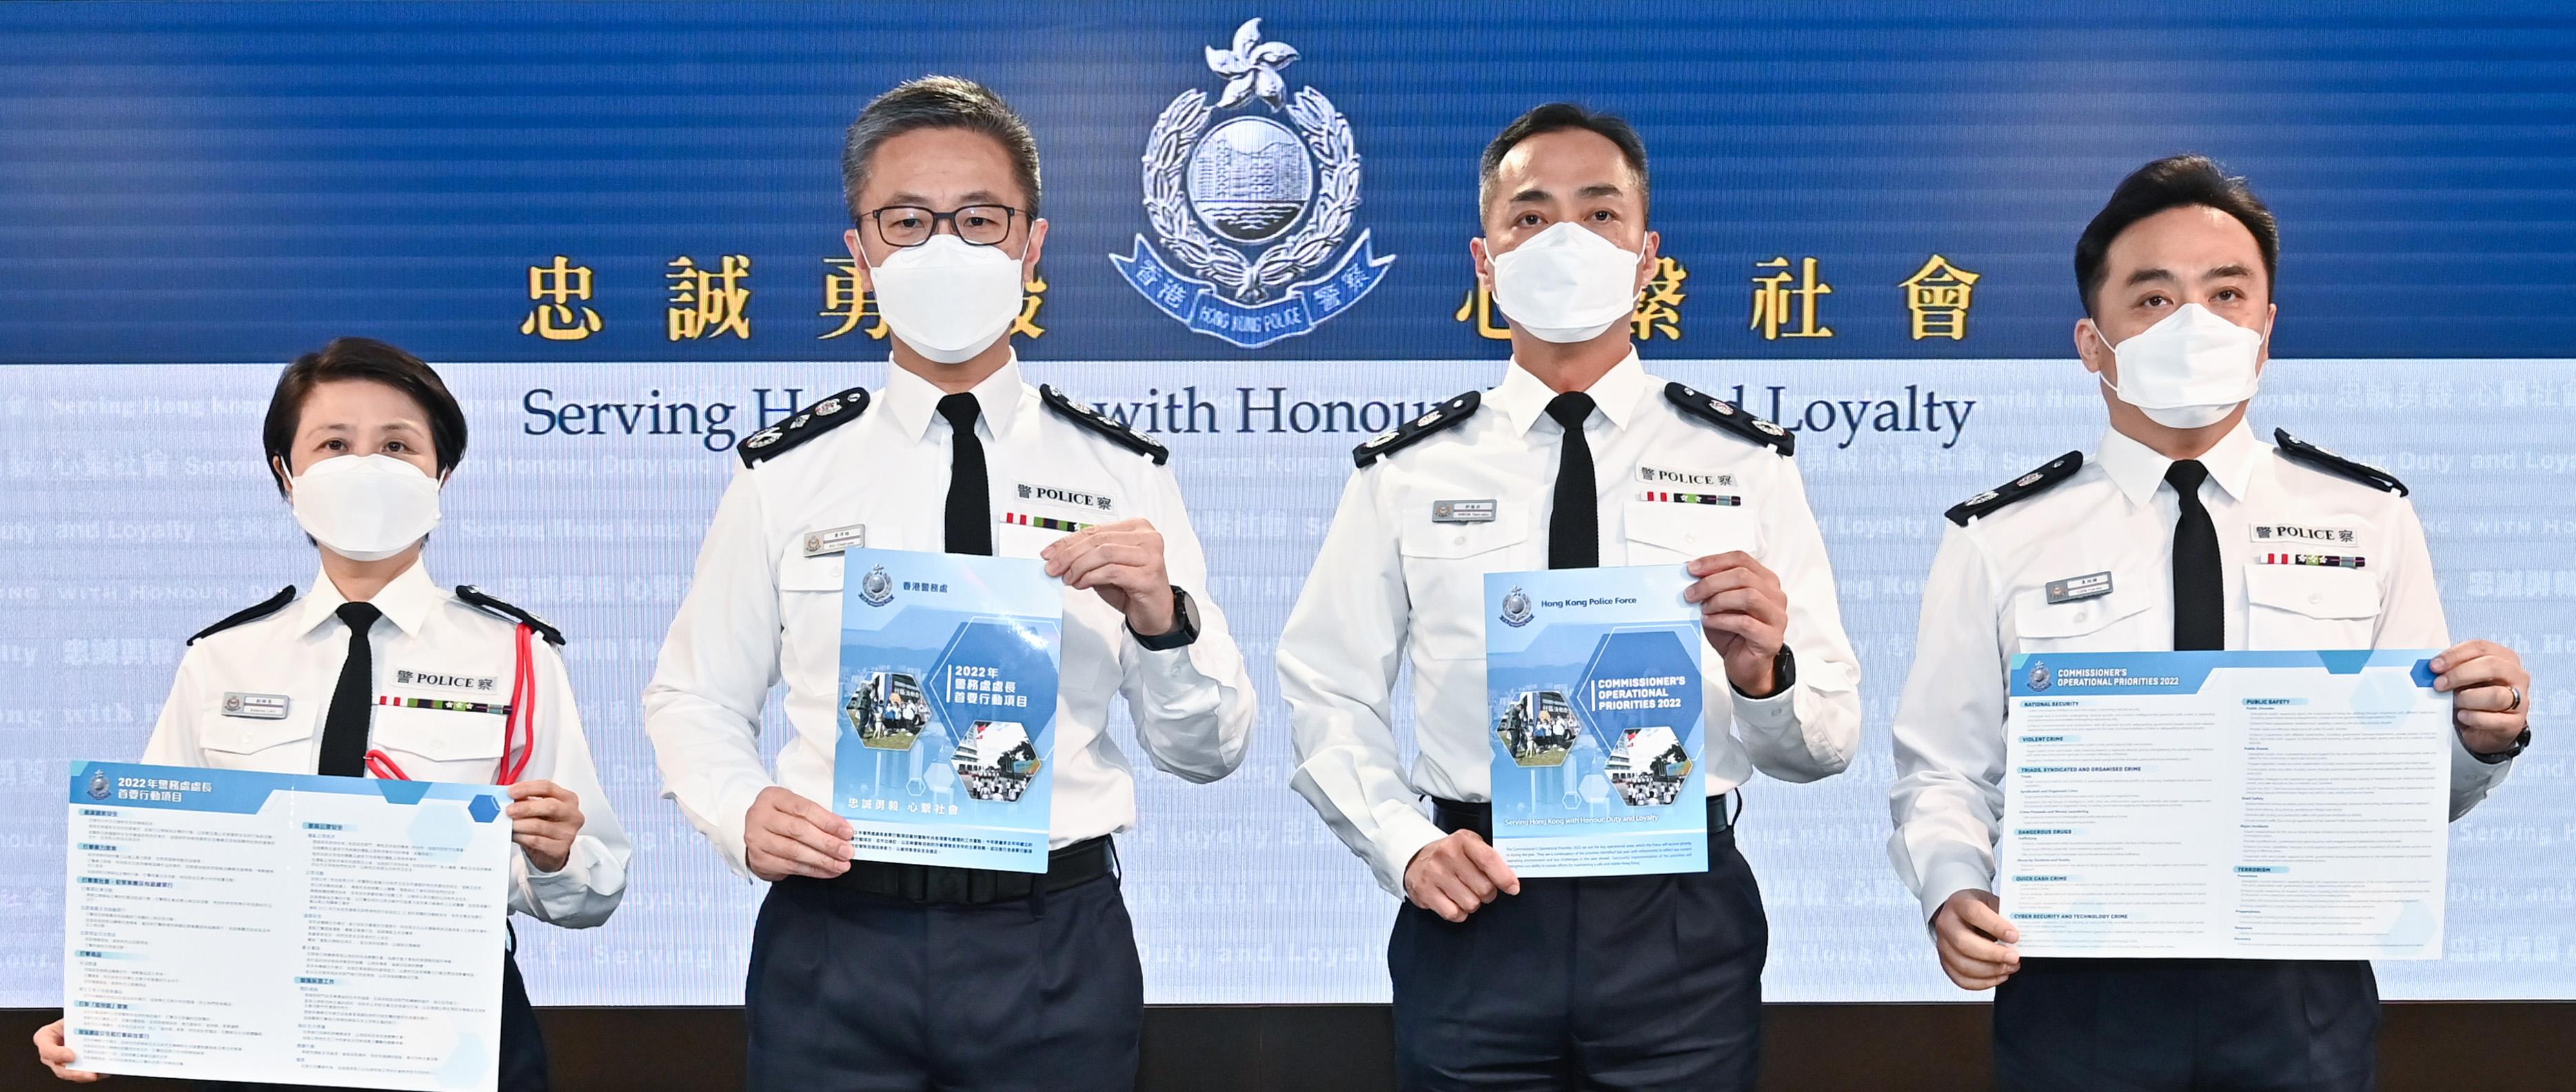 The Commissioner of Police, Mr Siu Chak-yee (second left), reviewed the law and order situation of Hong Kong and the work of the Police in 2021 at a press conference today (January 27). Also attending the press conference were the Deputy Commissioner of Police (Management), Mr Kwok Yam-shu (second right); the Deputy Commissioner of Police (National Security), Ms Lau Chi-wai (first left); and the Deputy Commissioner of Police (Operations), Mr Yuen Yuk-kin (first right).